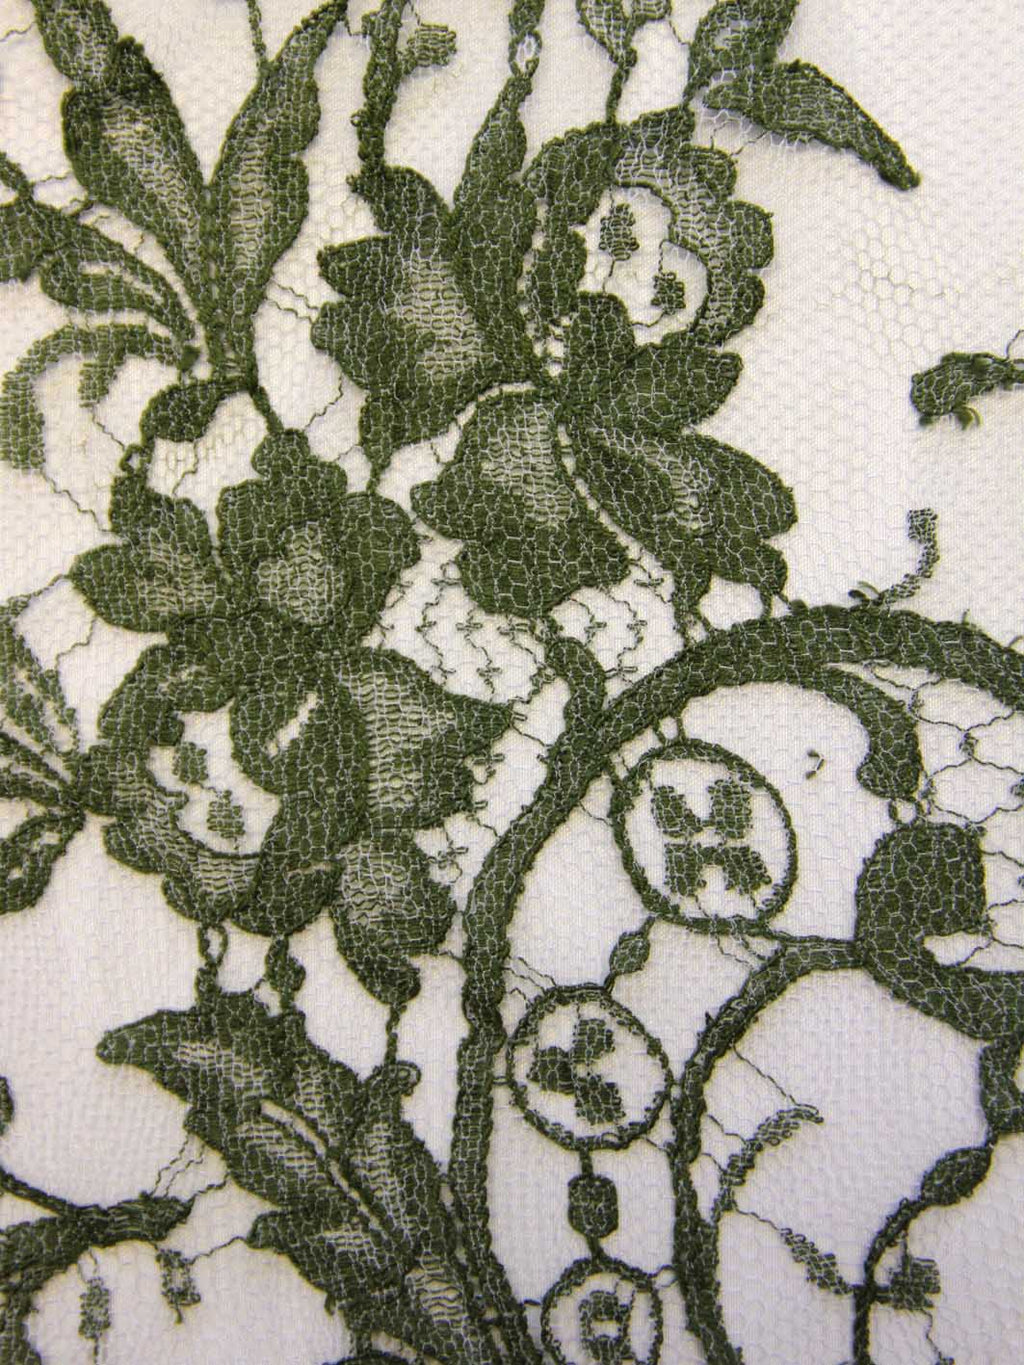 2023 Olive Green Lace Cotton Floral